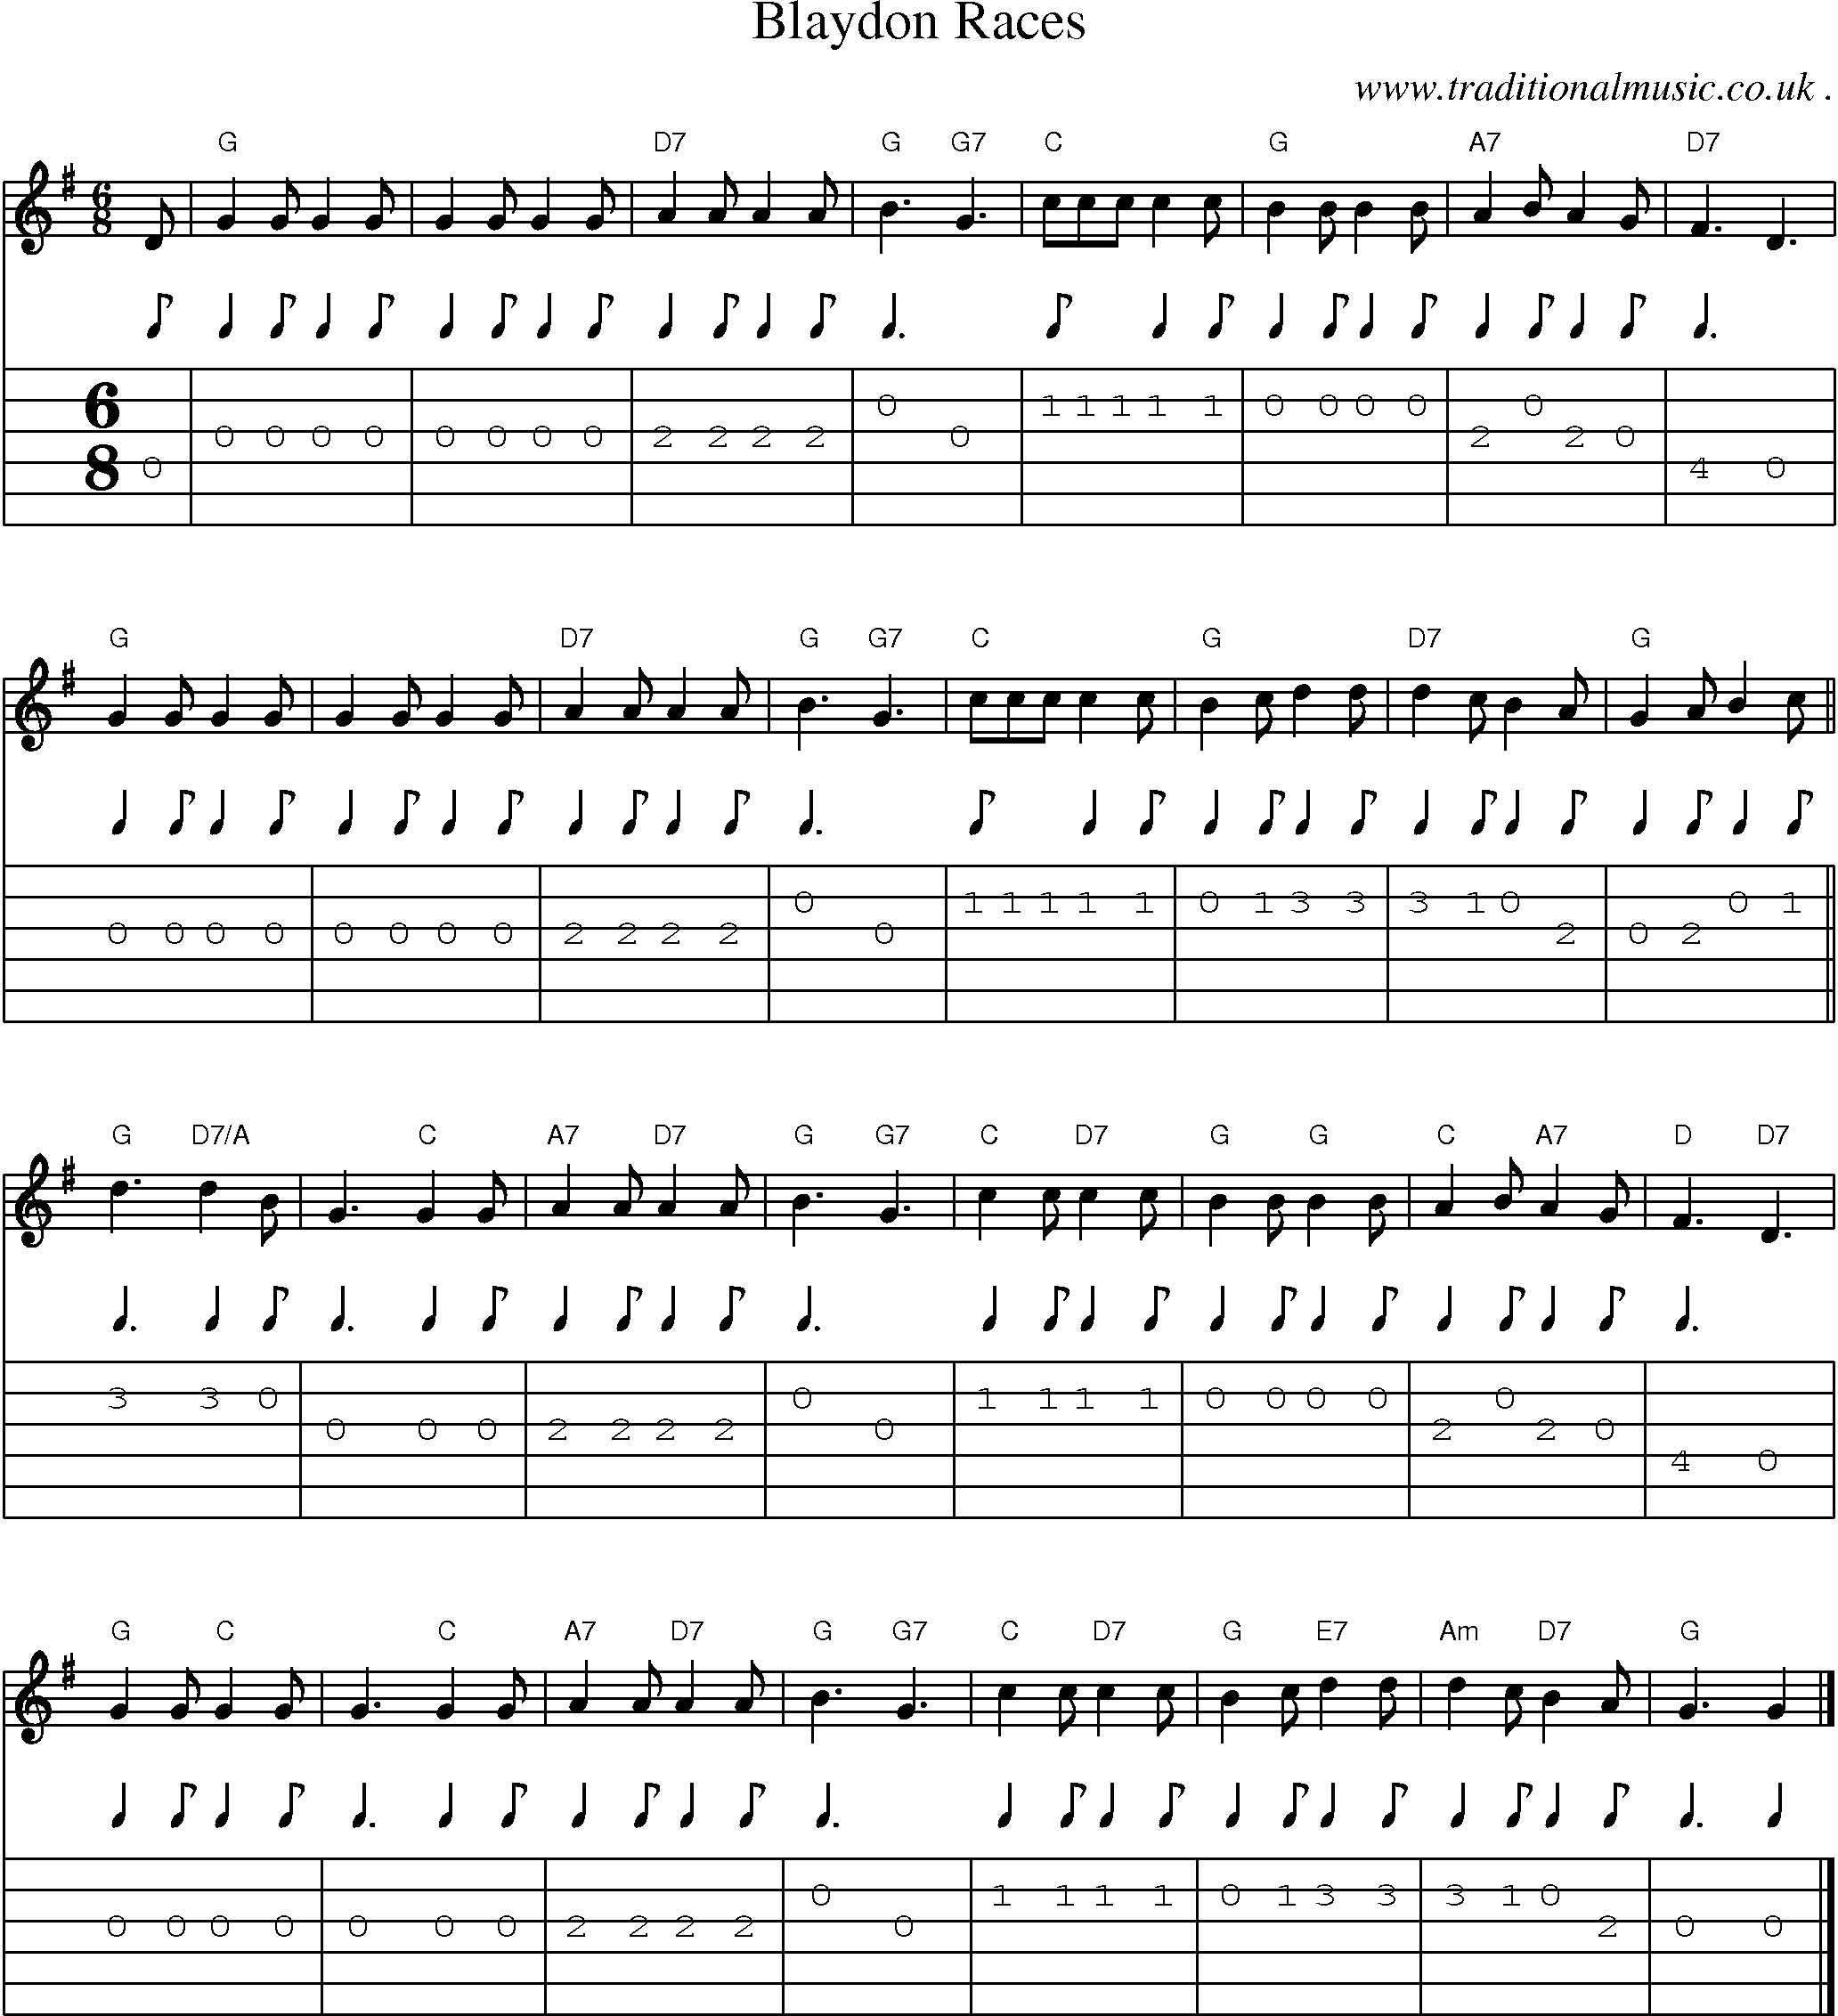 Music Score and Guitar Tabs for Blaydon Races